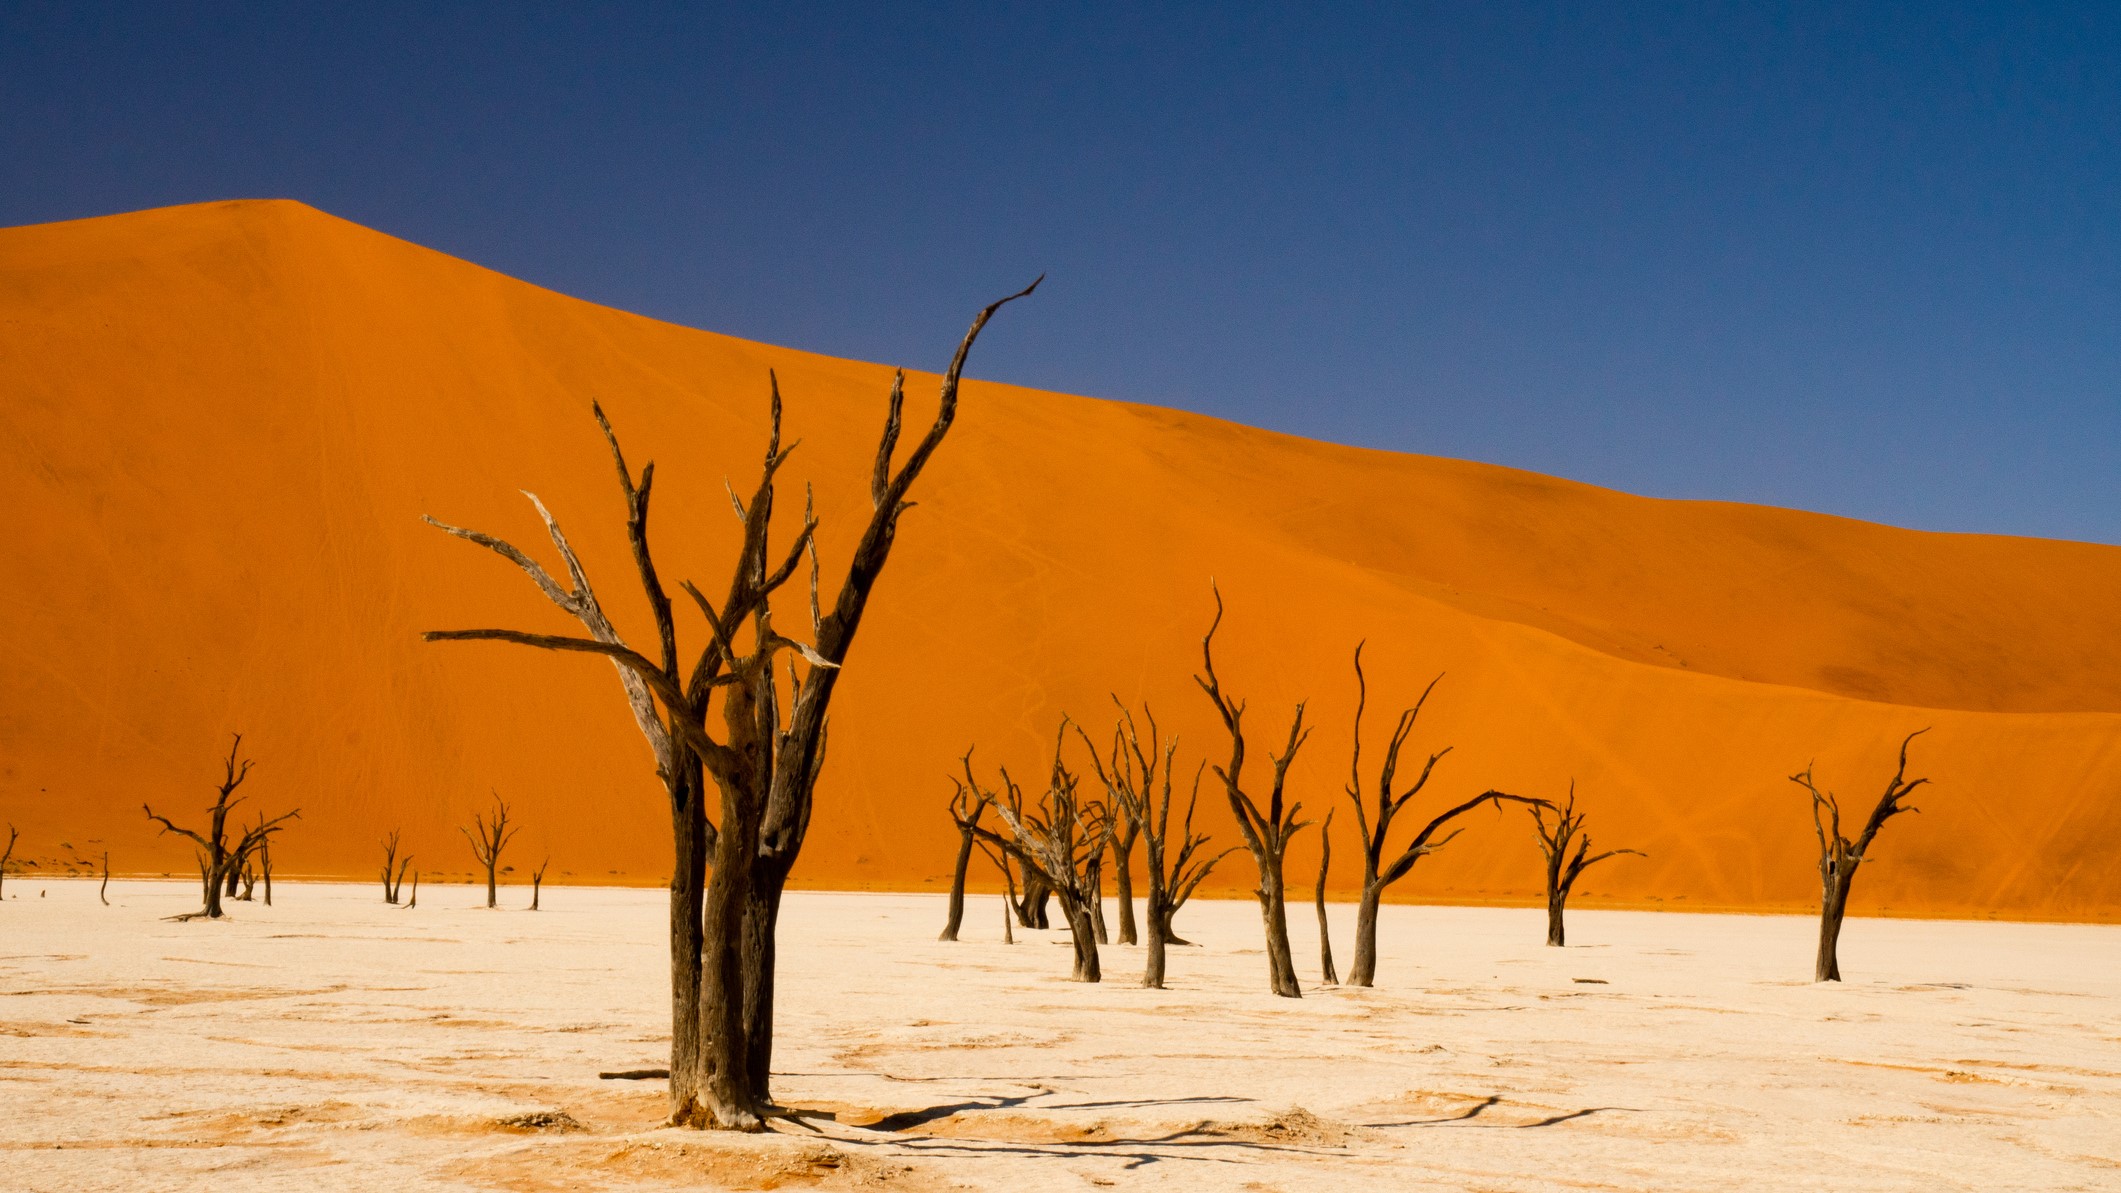 Dead trees in the foreground and a huge orangey red sand dune in the background. Deep blue sky above.